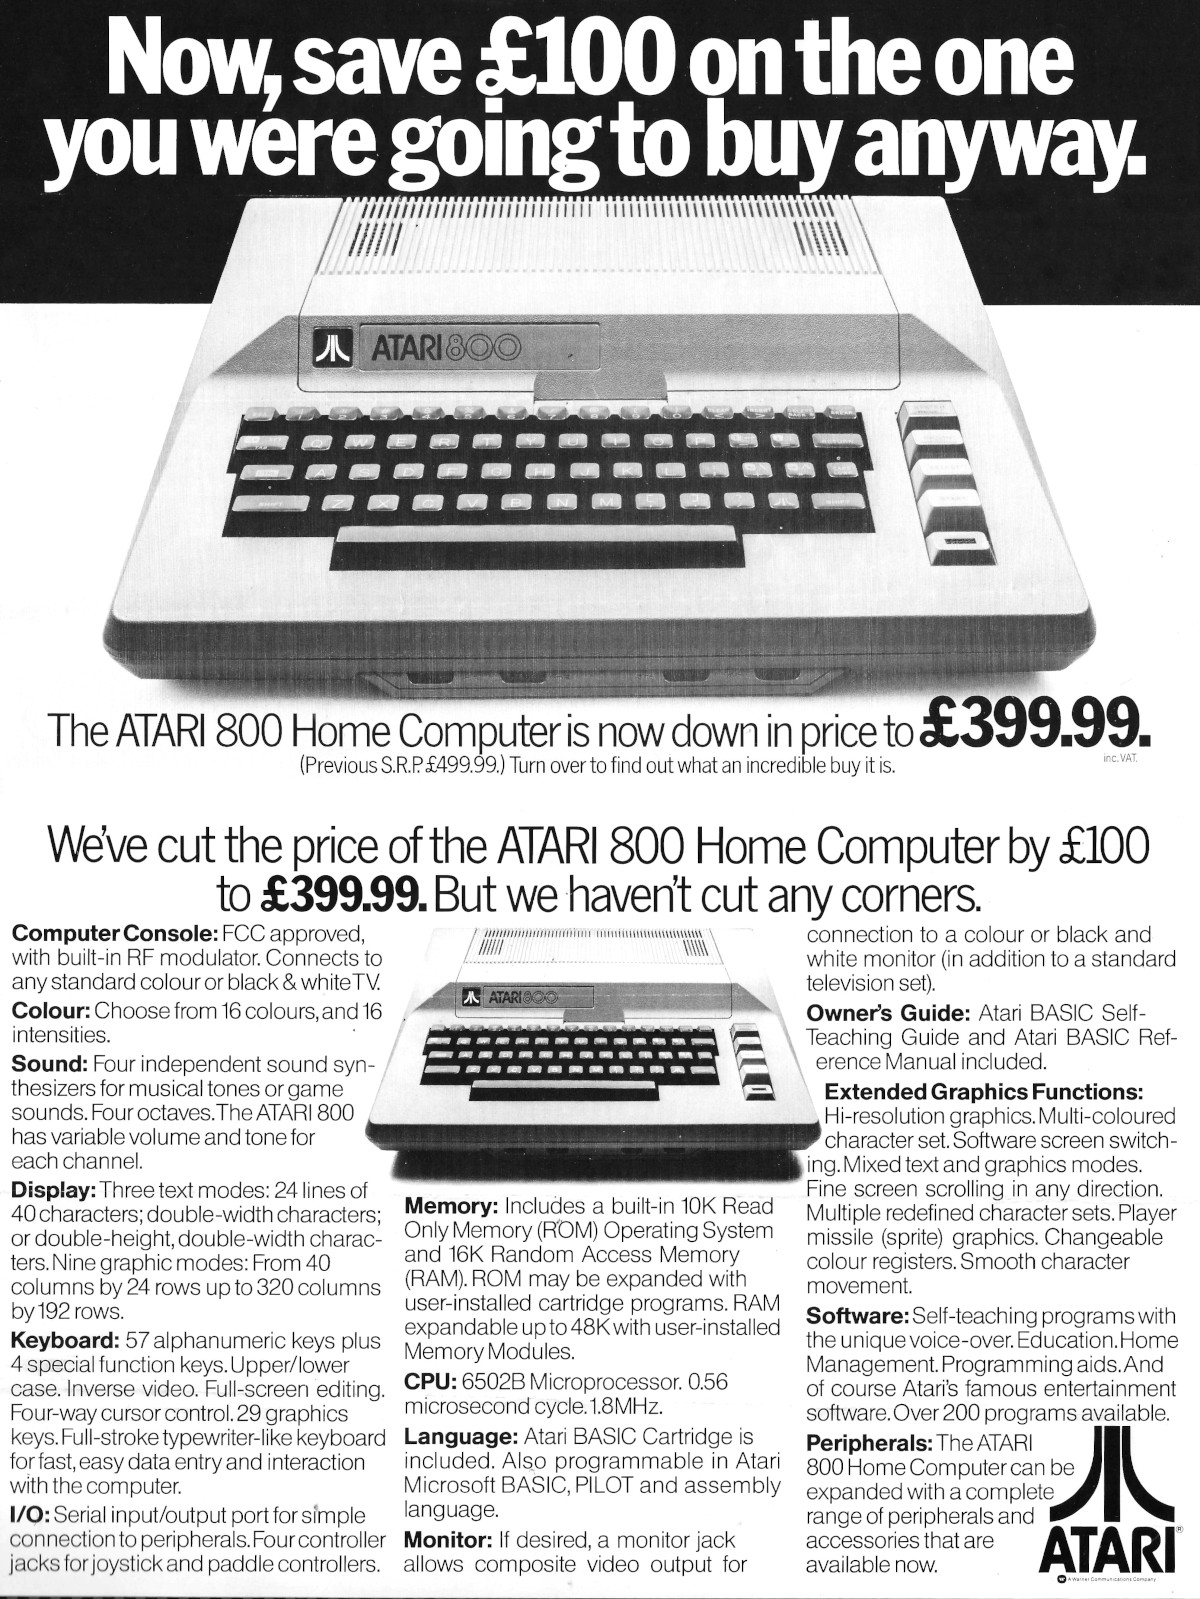 A flyer, which appeared in June 1983's Personal Computer World, announcing a price reduction on Atari's <span class='hilite'><span class='hilite'><span class='hilite'>800</span></span></span> model, from £499 to £399